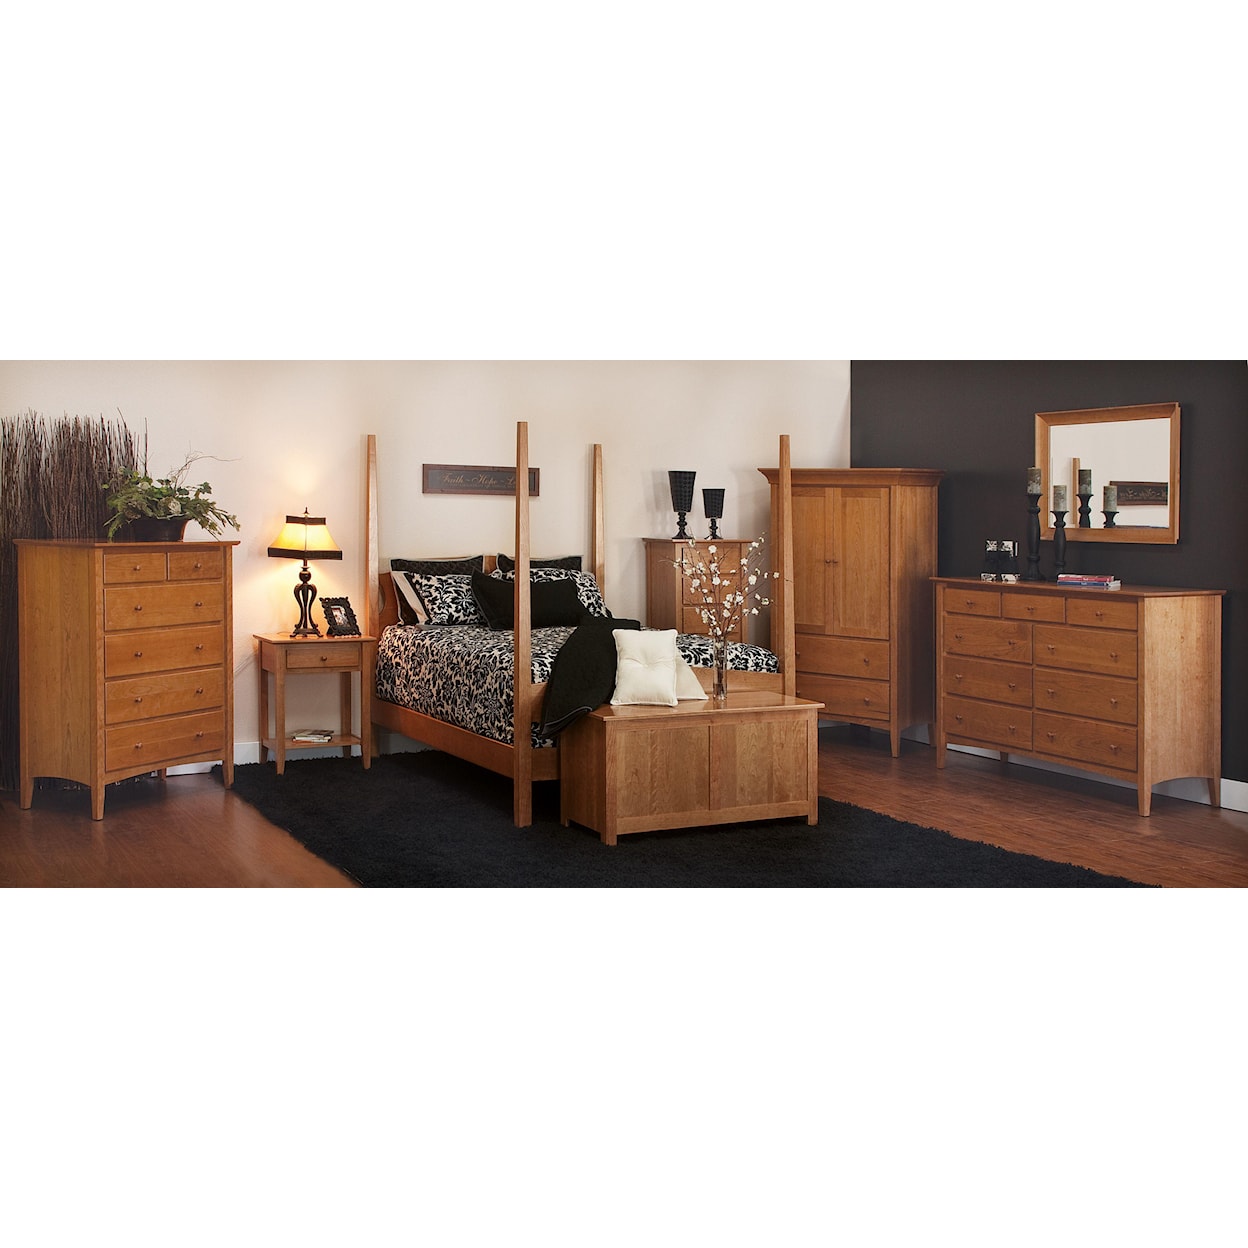 Amish Impressions by Fusion Designs Sedona Cal King Poster Bed